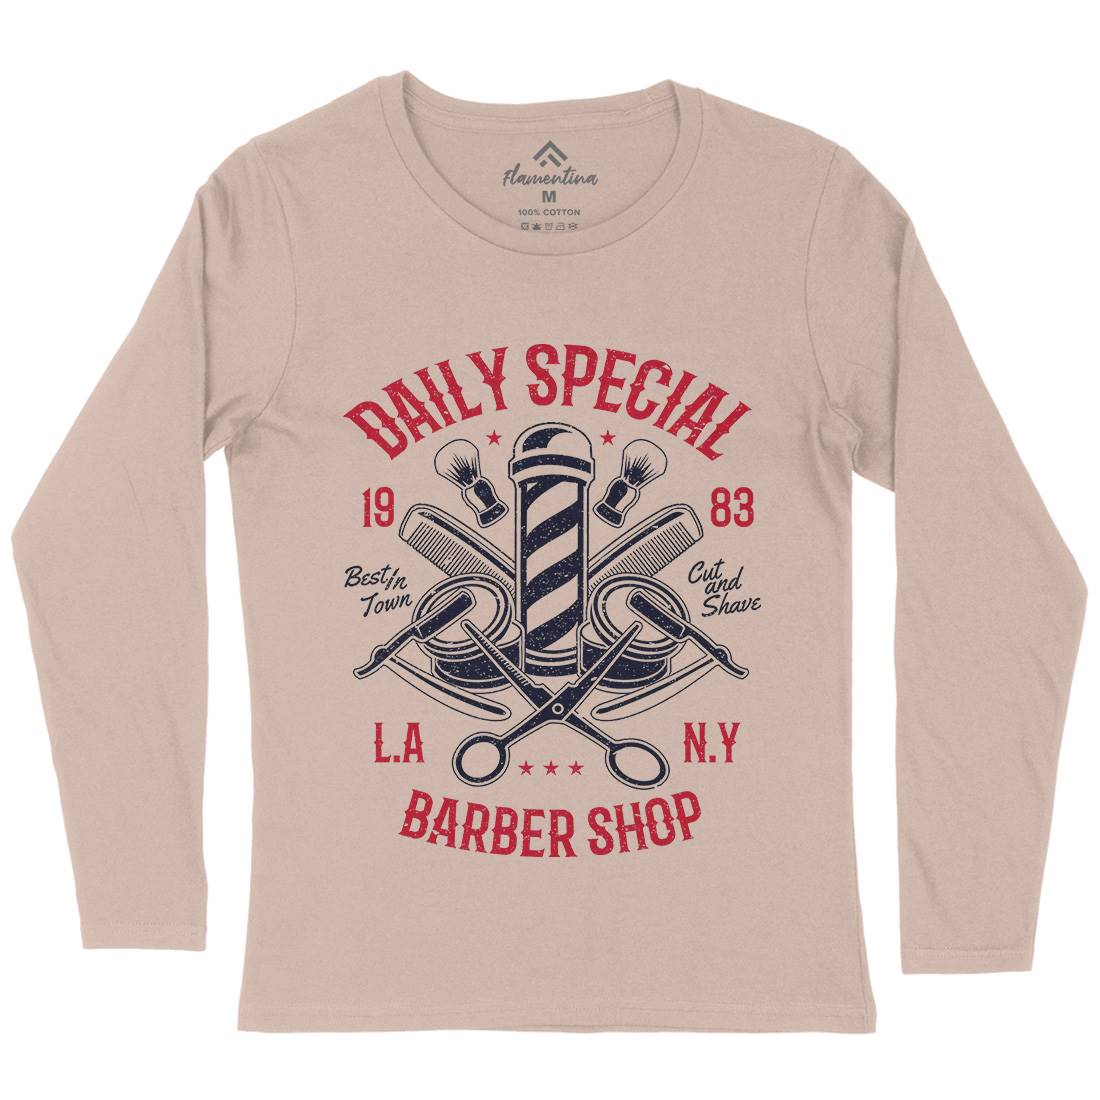 Daily Special Shop Womens Long Sleeve T-Shirt Barber A041